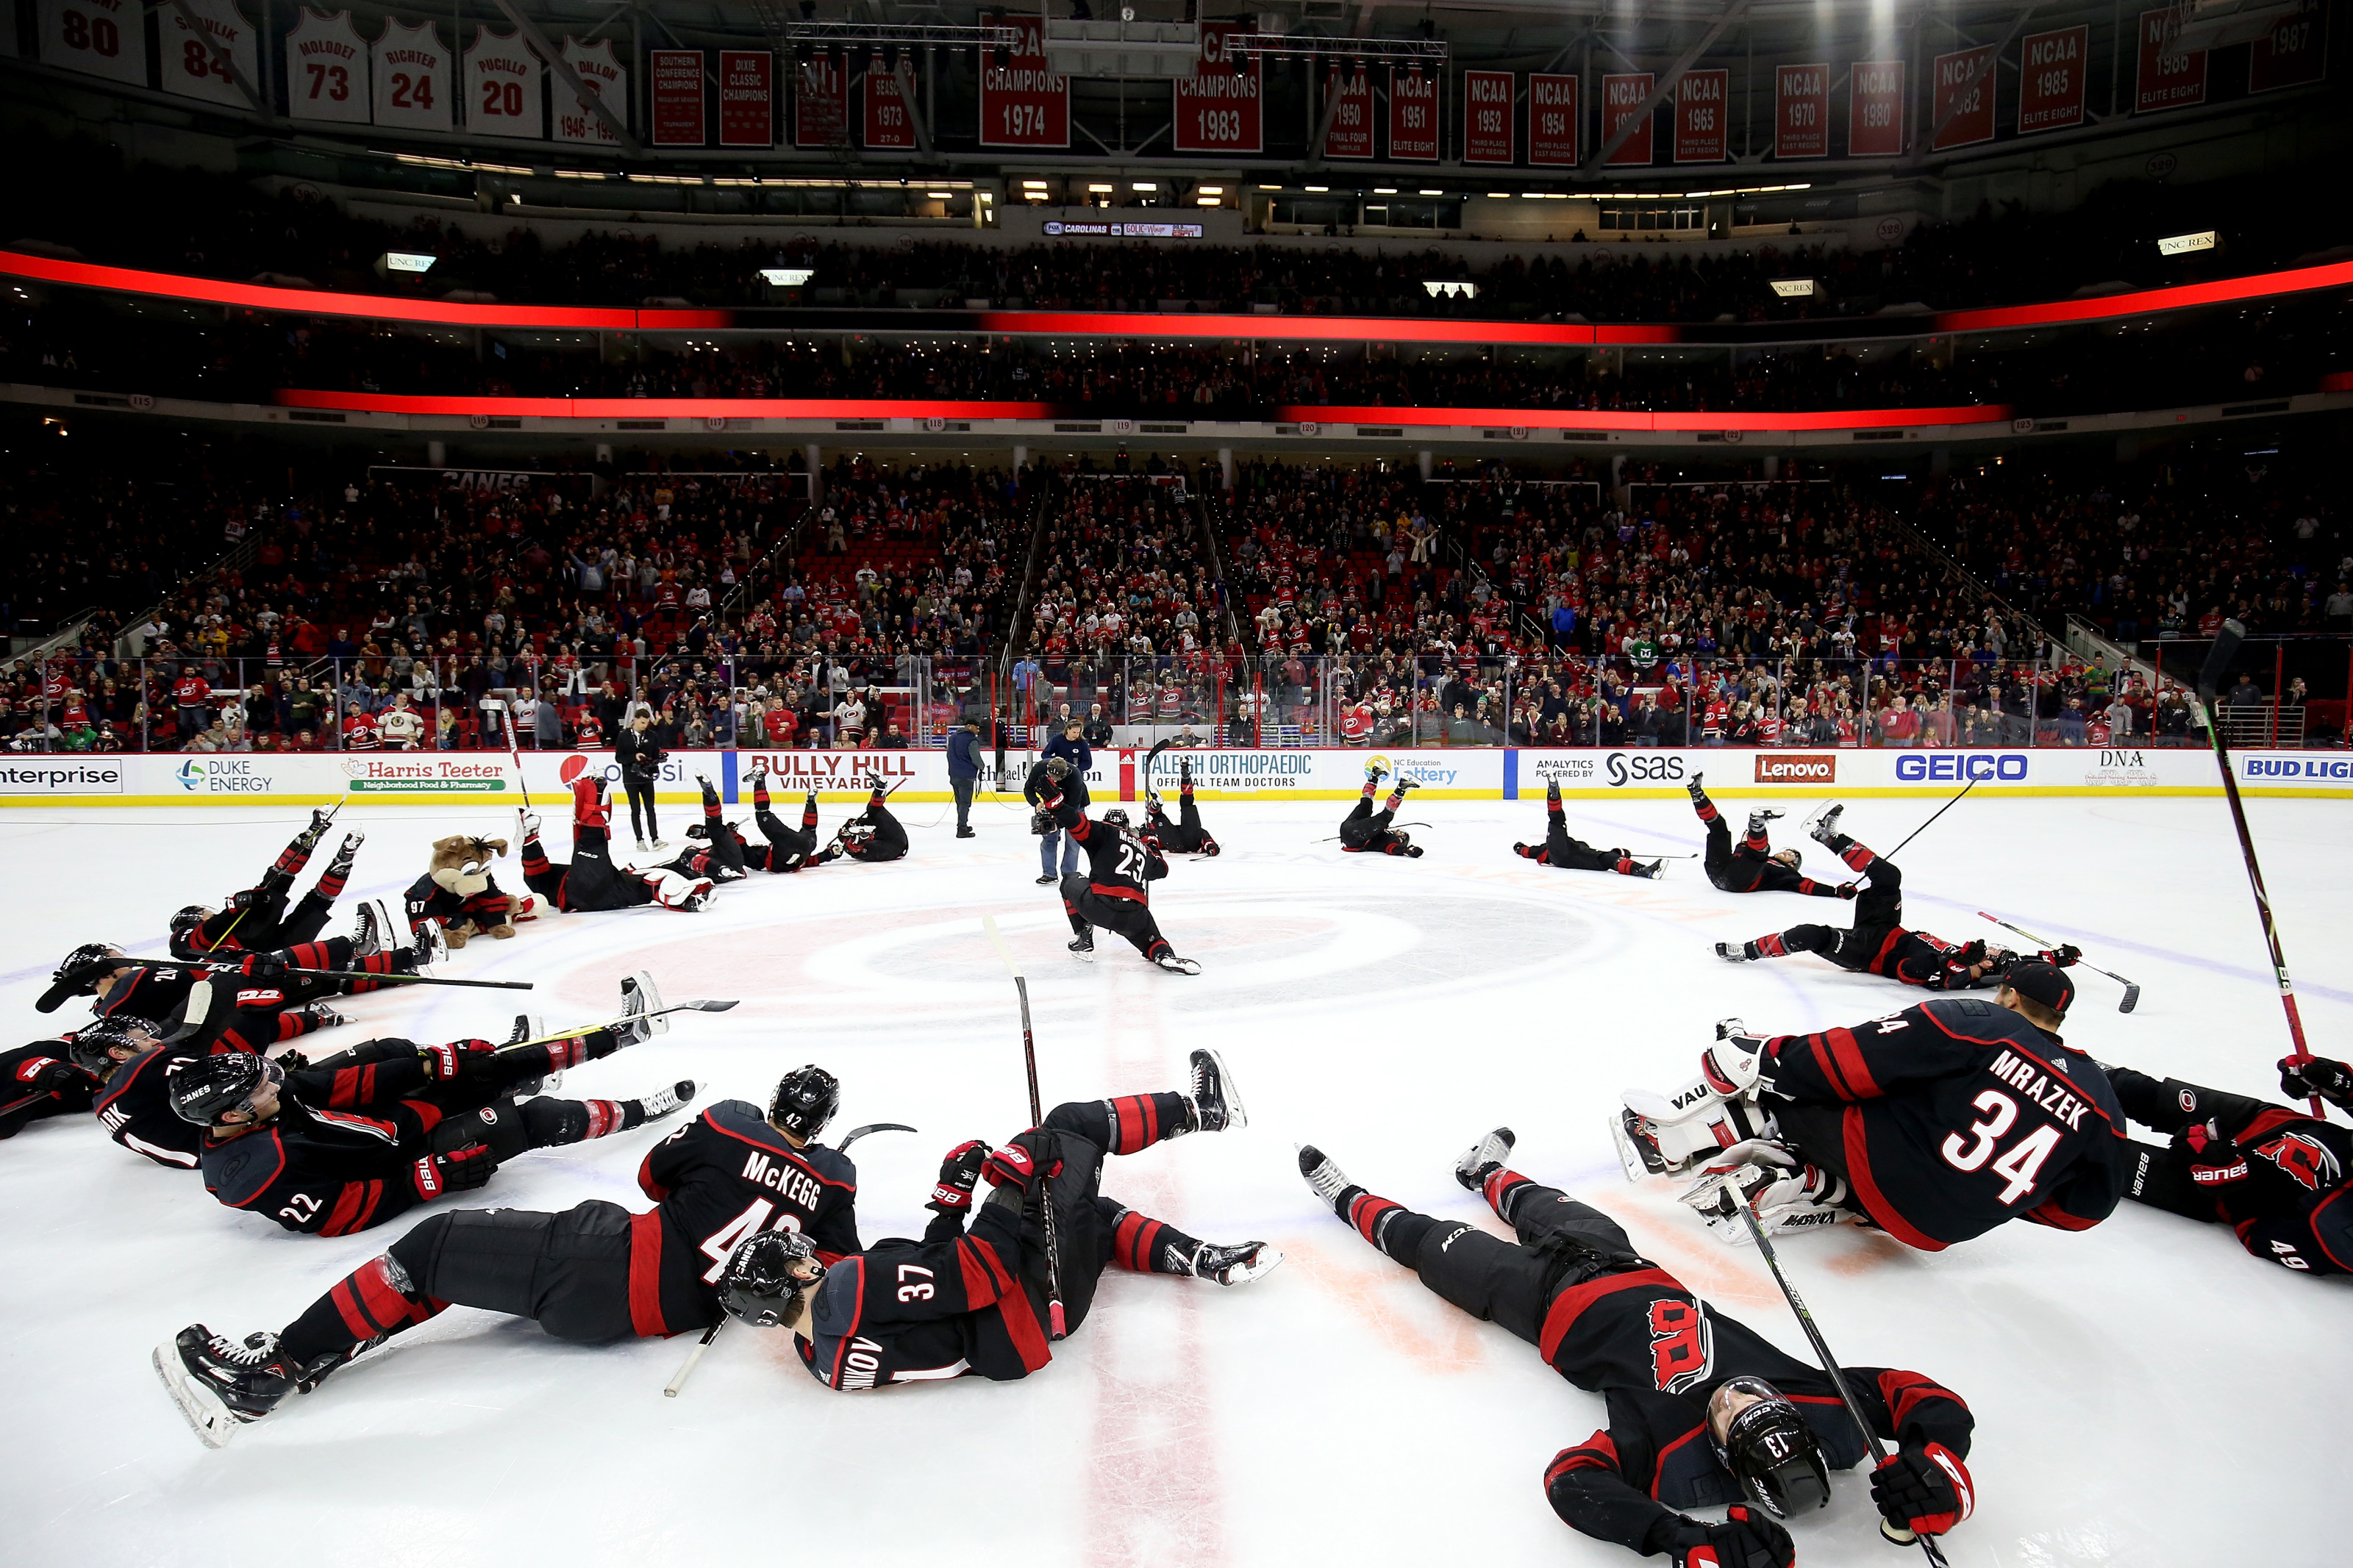 Carolina Hurricanes skate out to 'Bunch of Jerks' ice projection in latest  Storm Surge